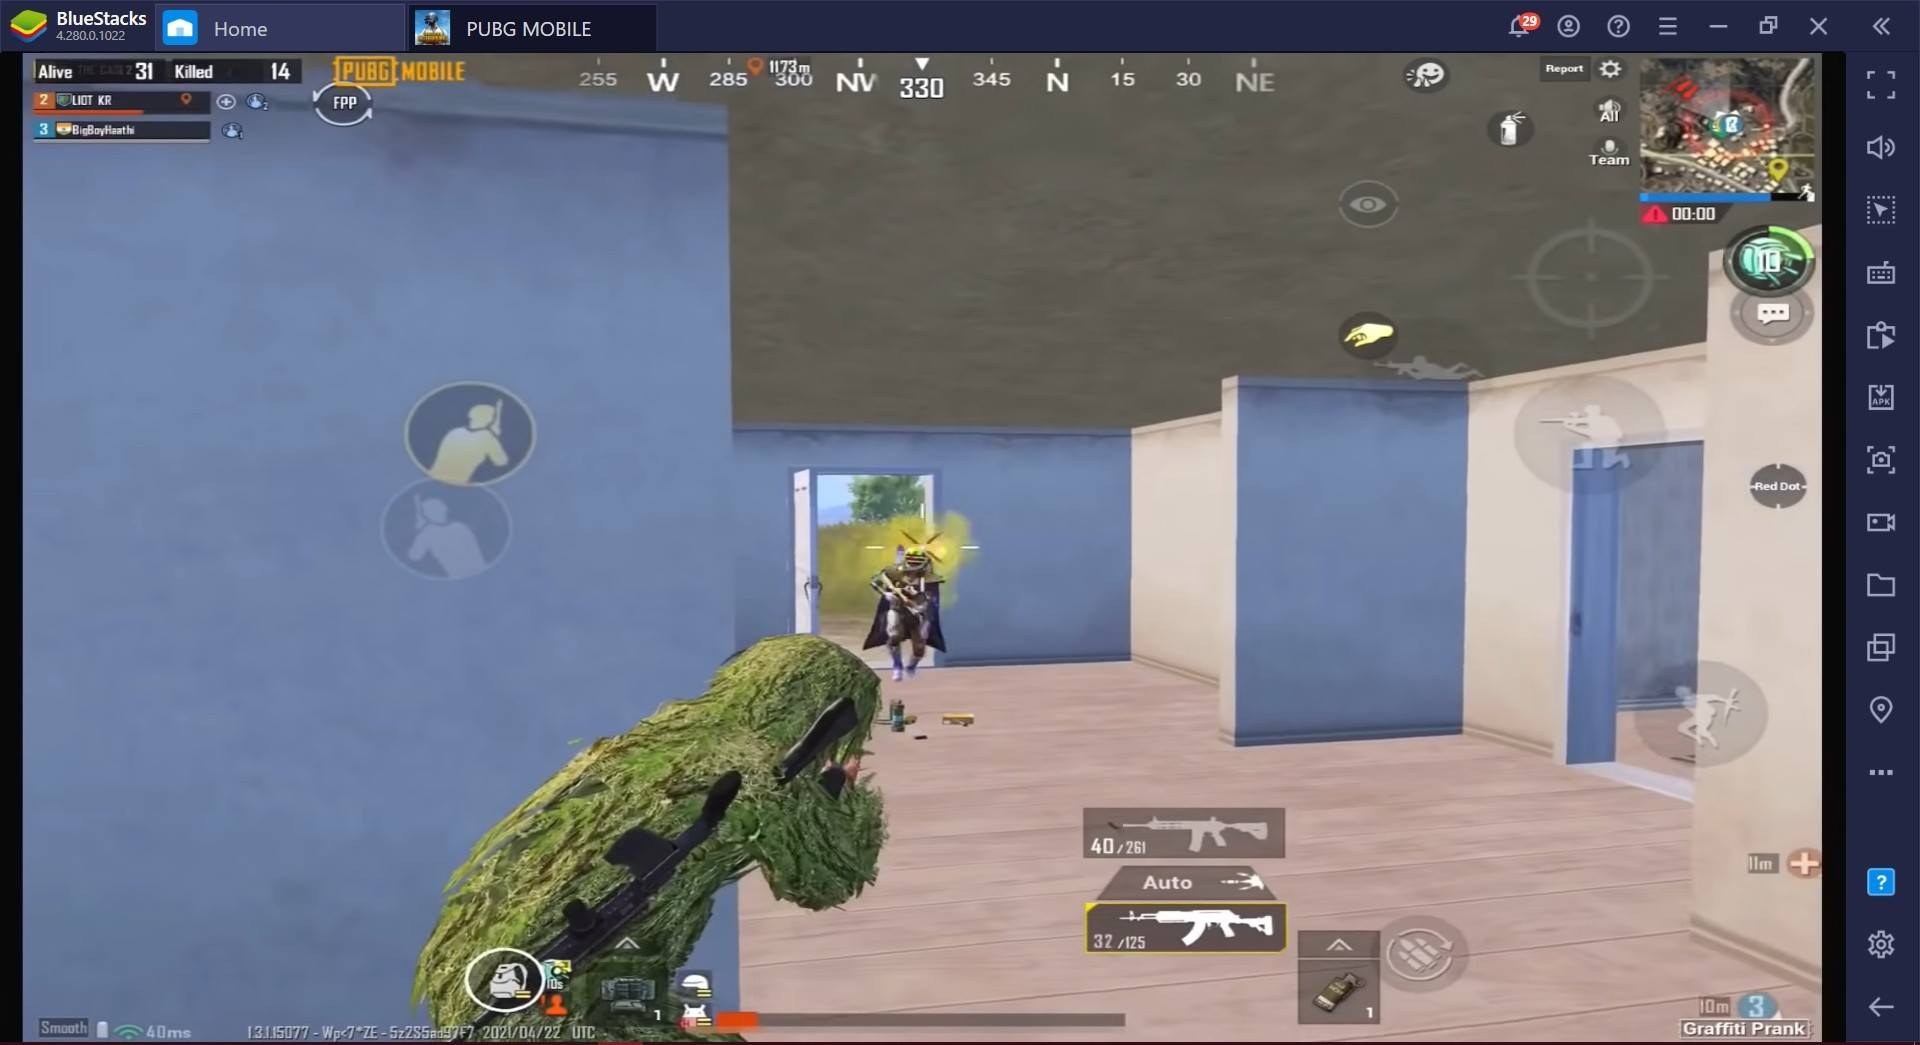 Dominate Everywhere: BlueStacks Guide to Terrains in PUBG Mobile